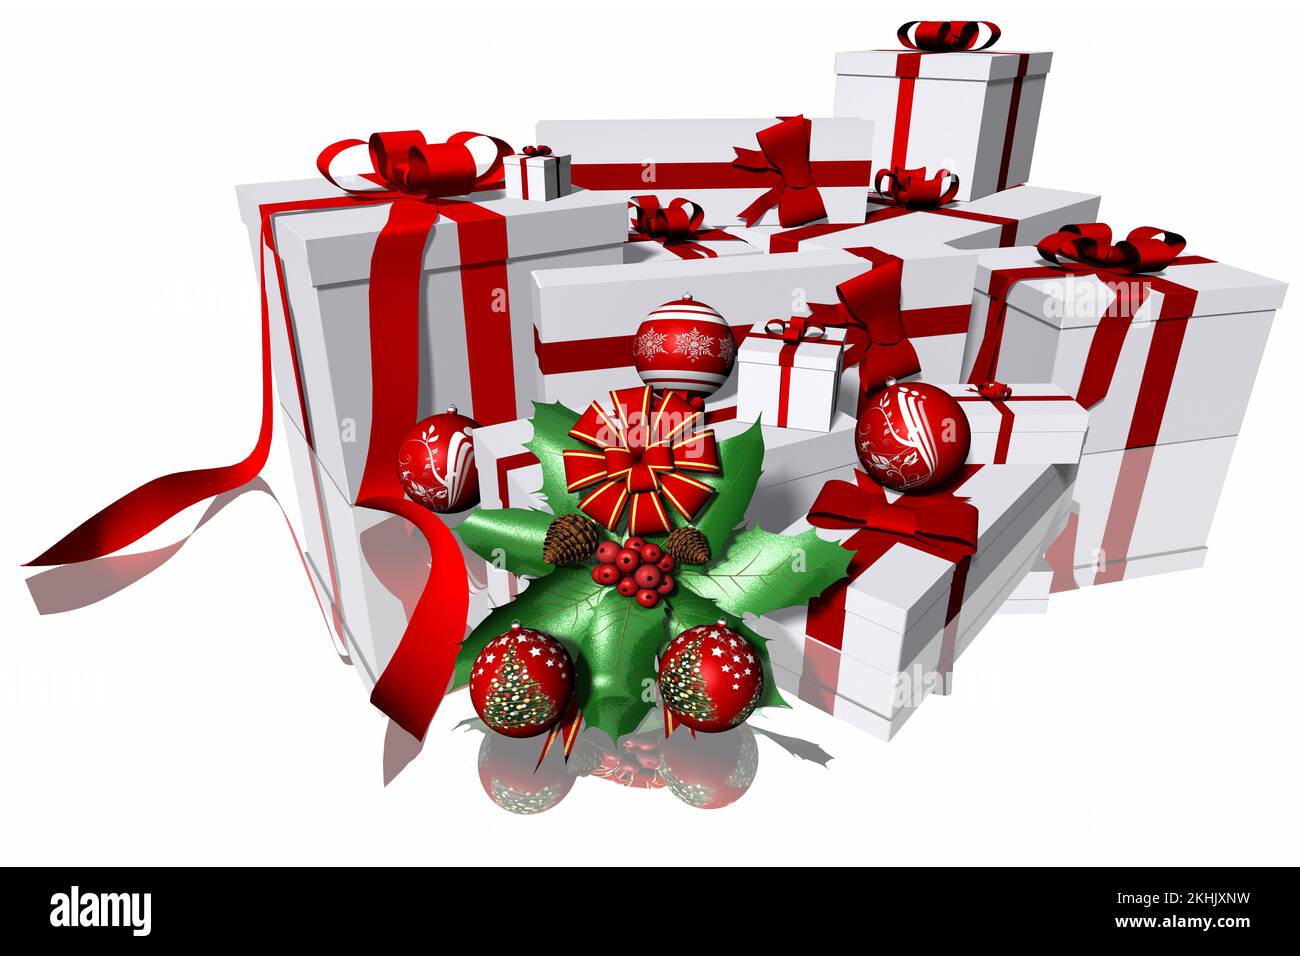 3D illustration. Gift Packages with Christmas decoration. white background. Stock Photo